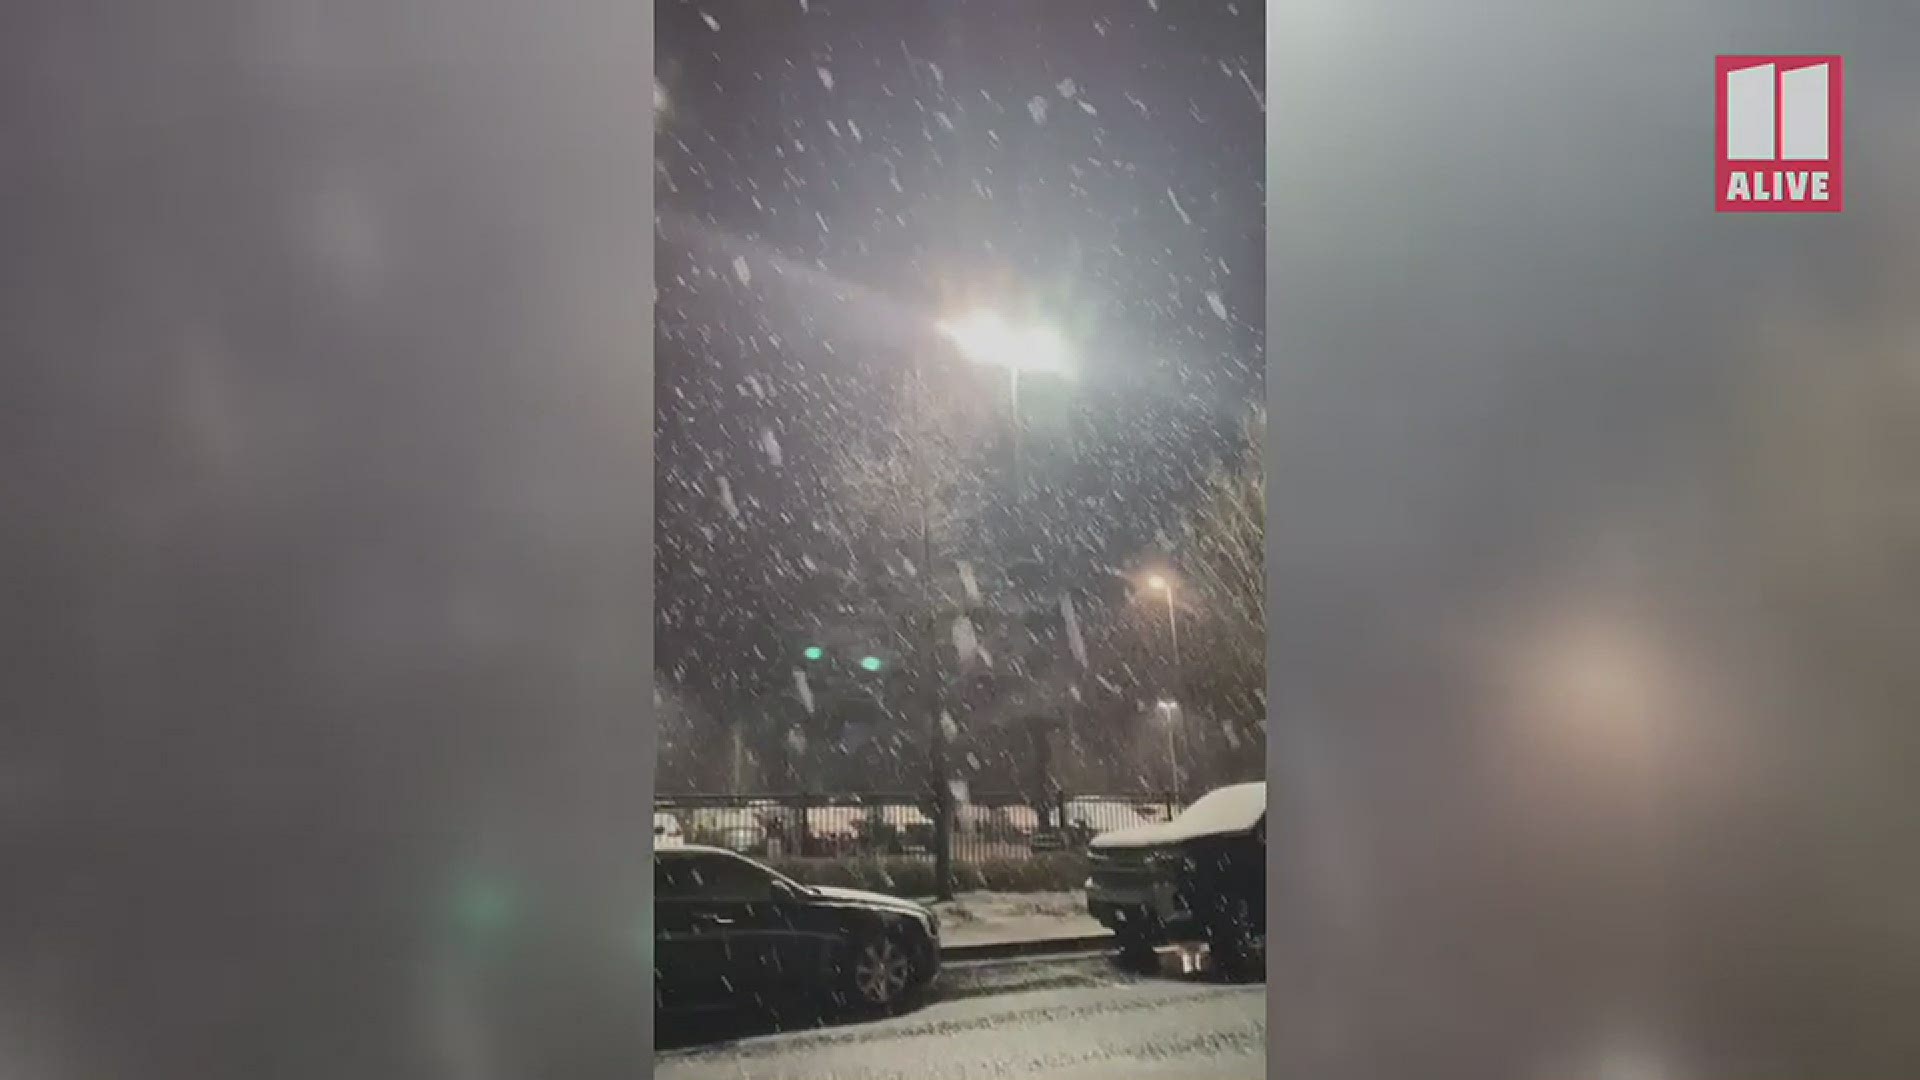 Priscilla Joyner captured this video of snow in Lawrenceville, Georgia where there's actually snow collecting on cars in a nearby parking lot.